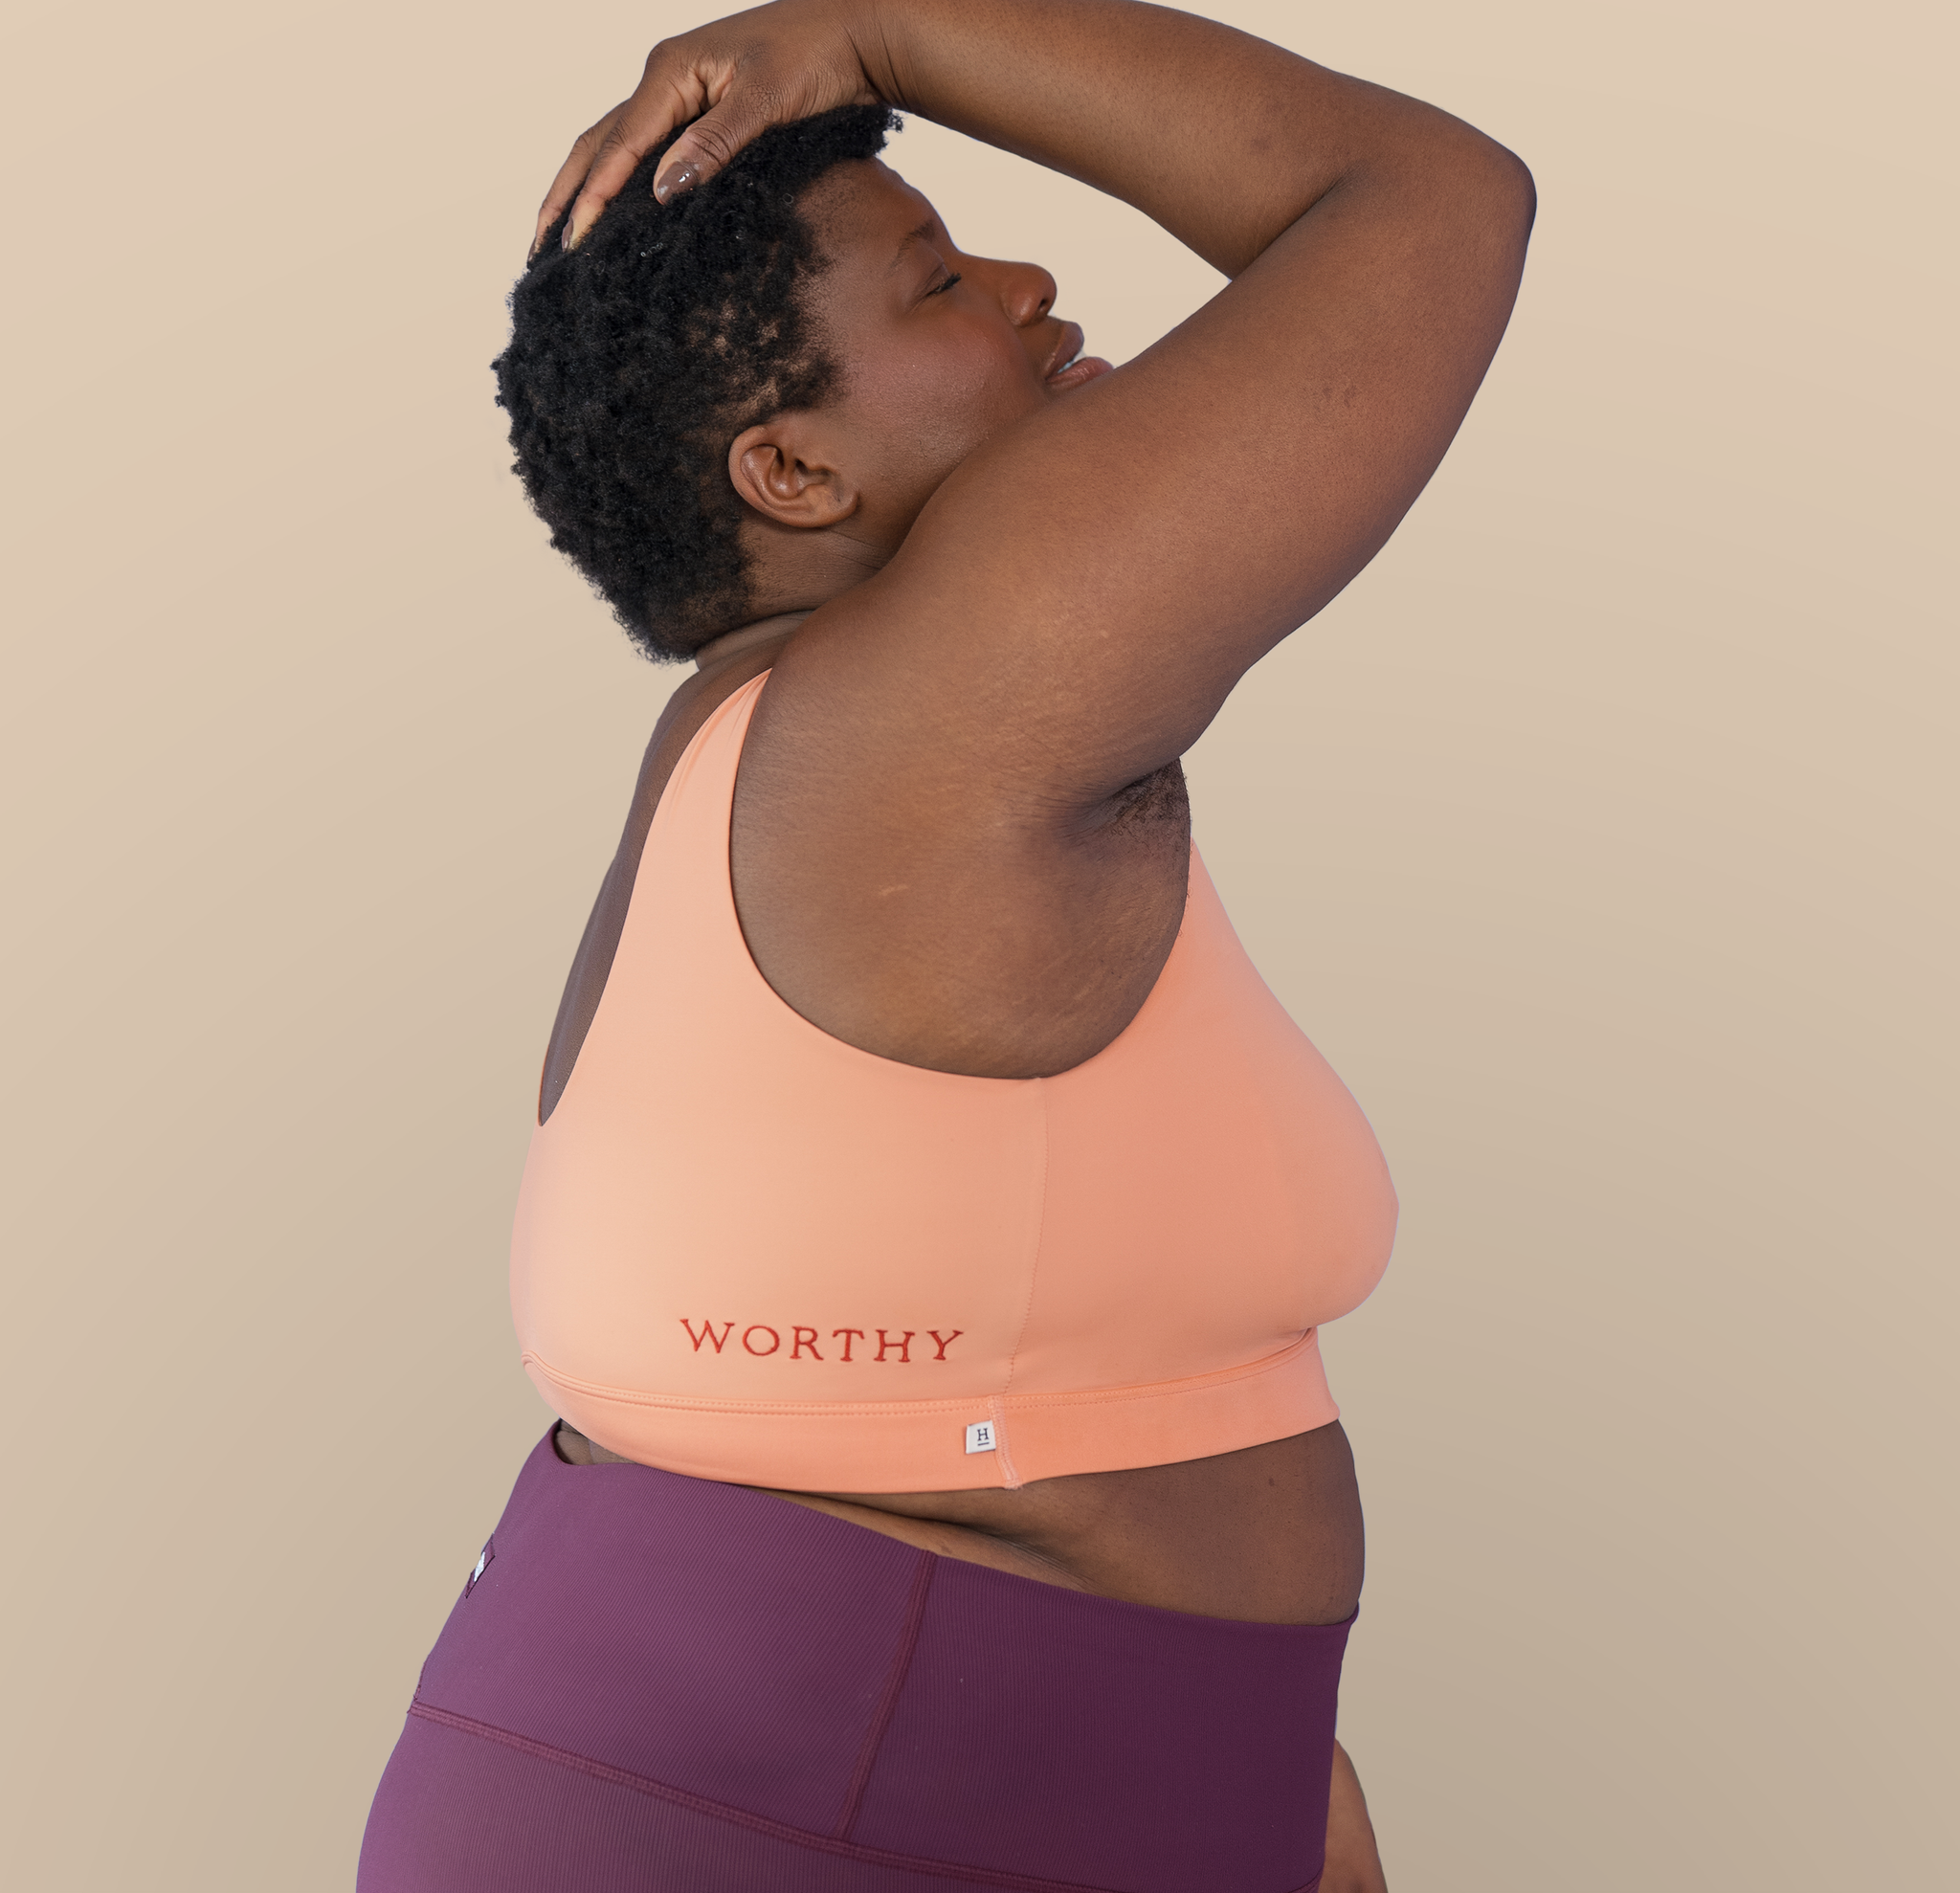 Harper Wilde - The Bliss: Stone. Our buttery-soft Bliss bra in a cool tone,  just in time for fall is almost sold out! This small-batch, Limited Edition  color will not last long